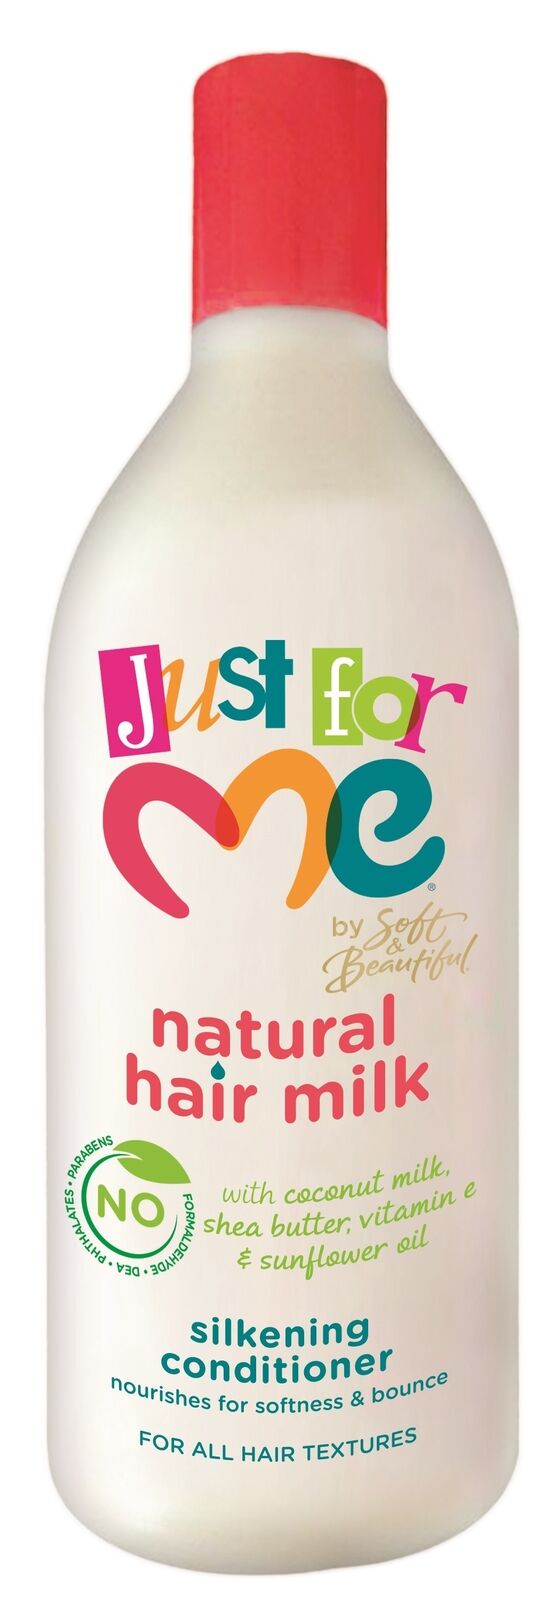 Just for Me Natural Hair Milk Conditioner